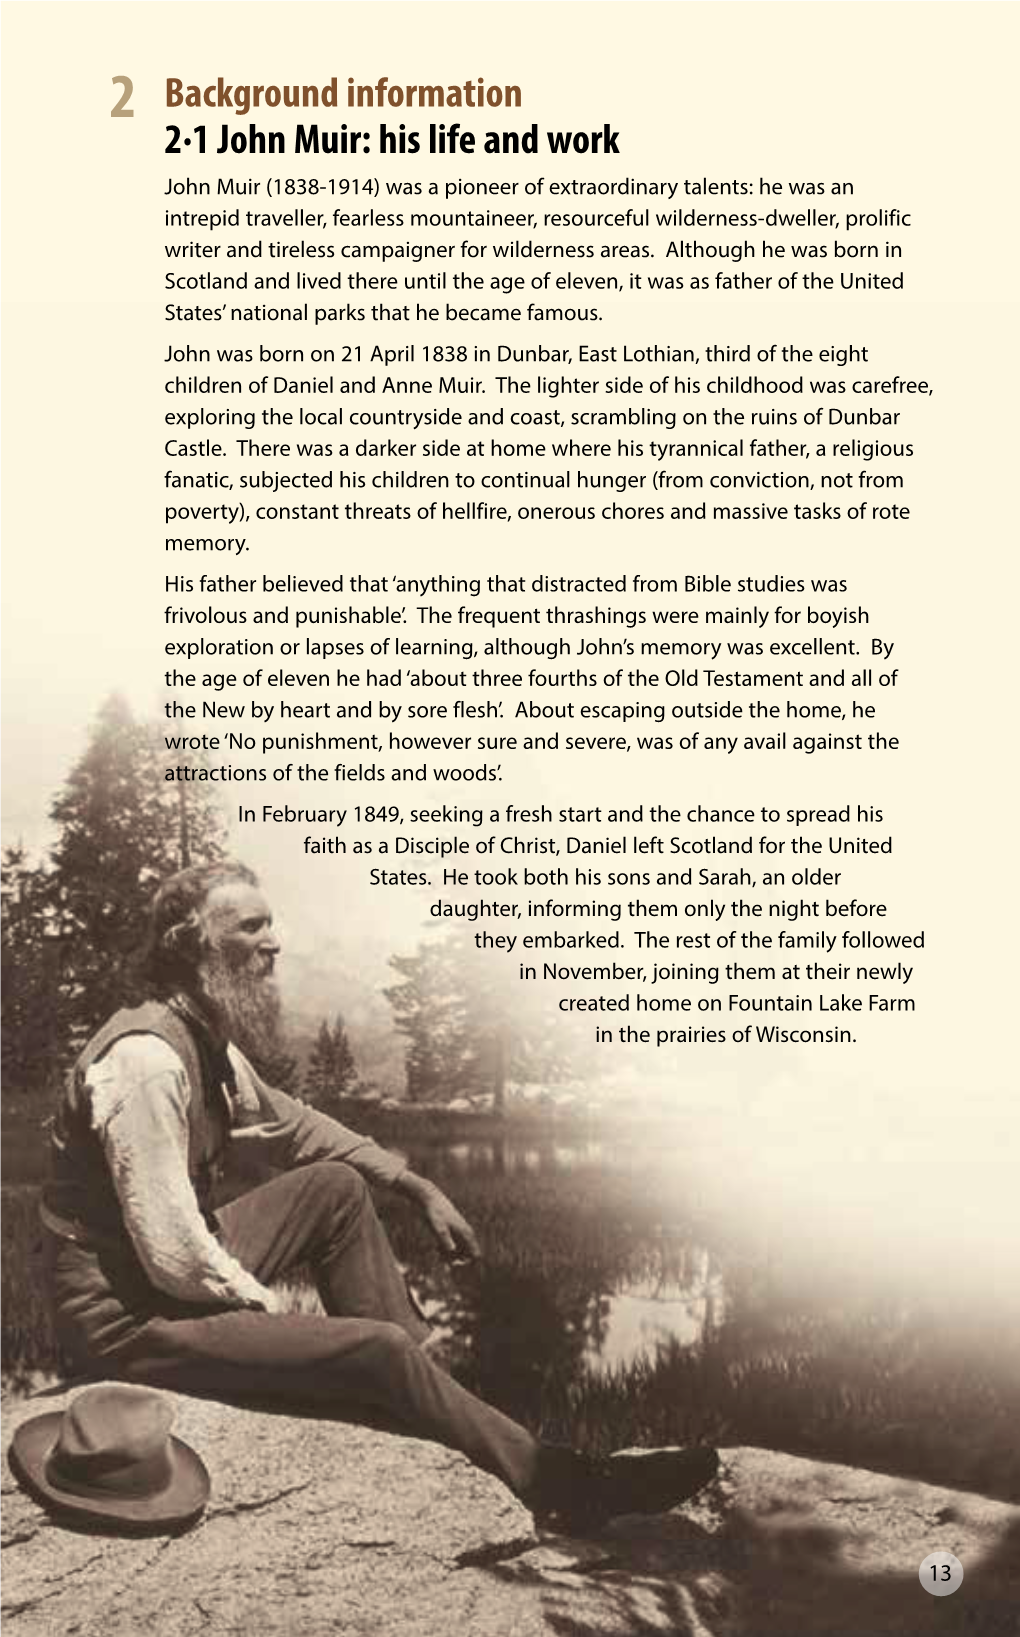 Background Information 2.1 John Muir: His Life and Work